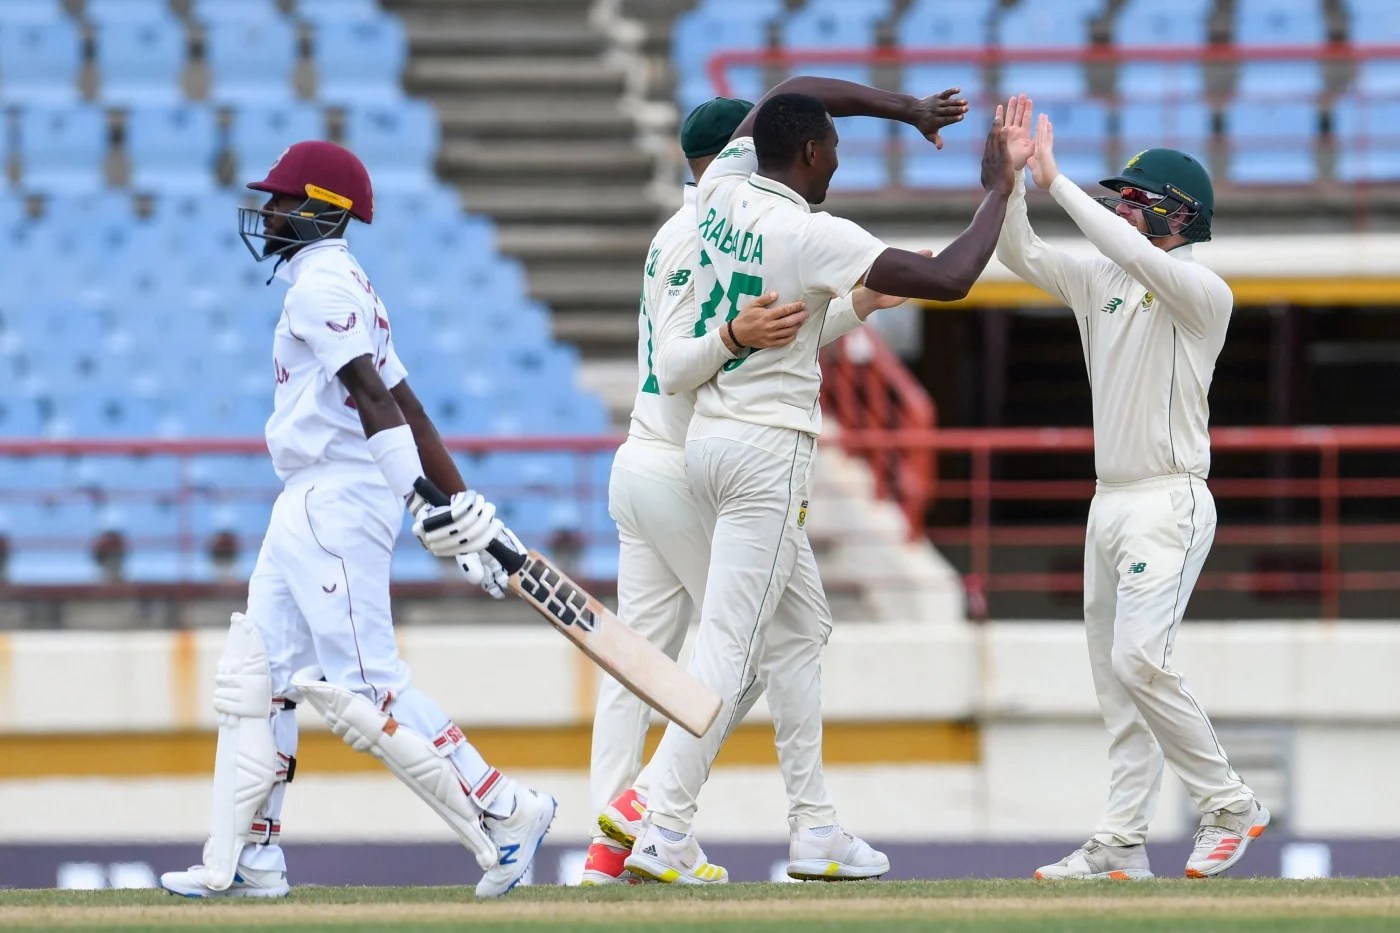 SA vs WI 2nd Test live streaming, South Africa vs West Indies 2nd Test, SA vs WI LIVE, SA WI Live Streaming, SA WI 2nd Test, SA WI 2nd Test Live Streaming